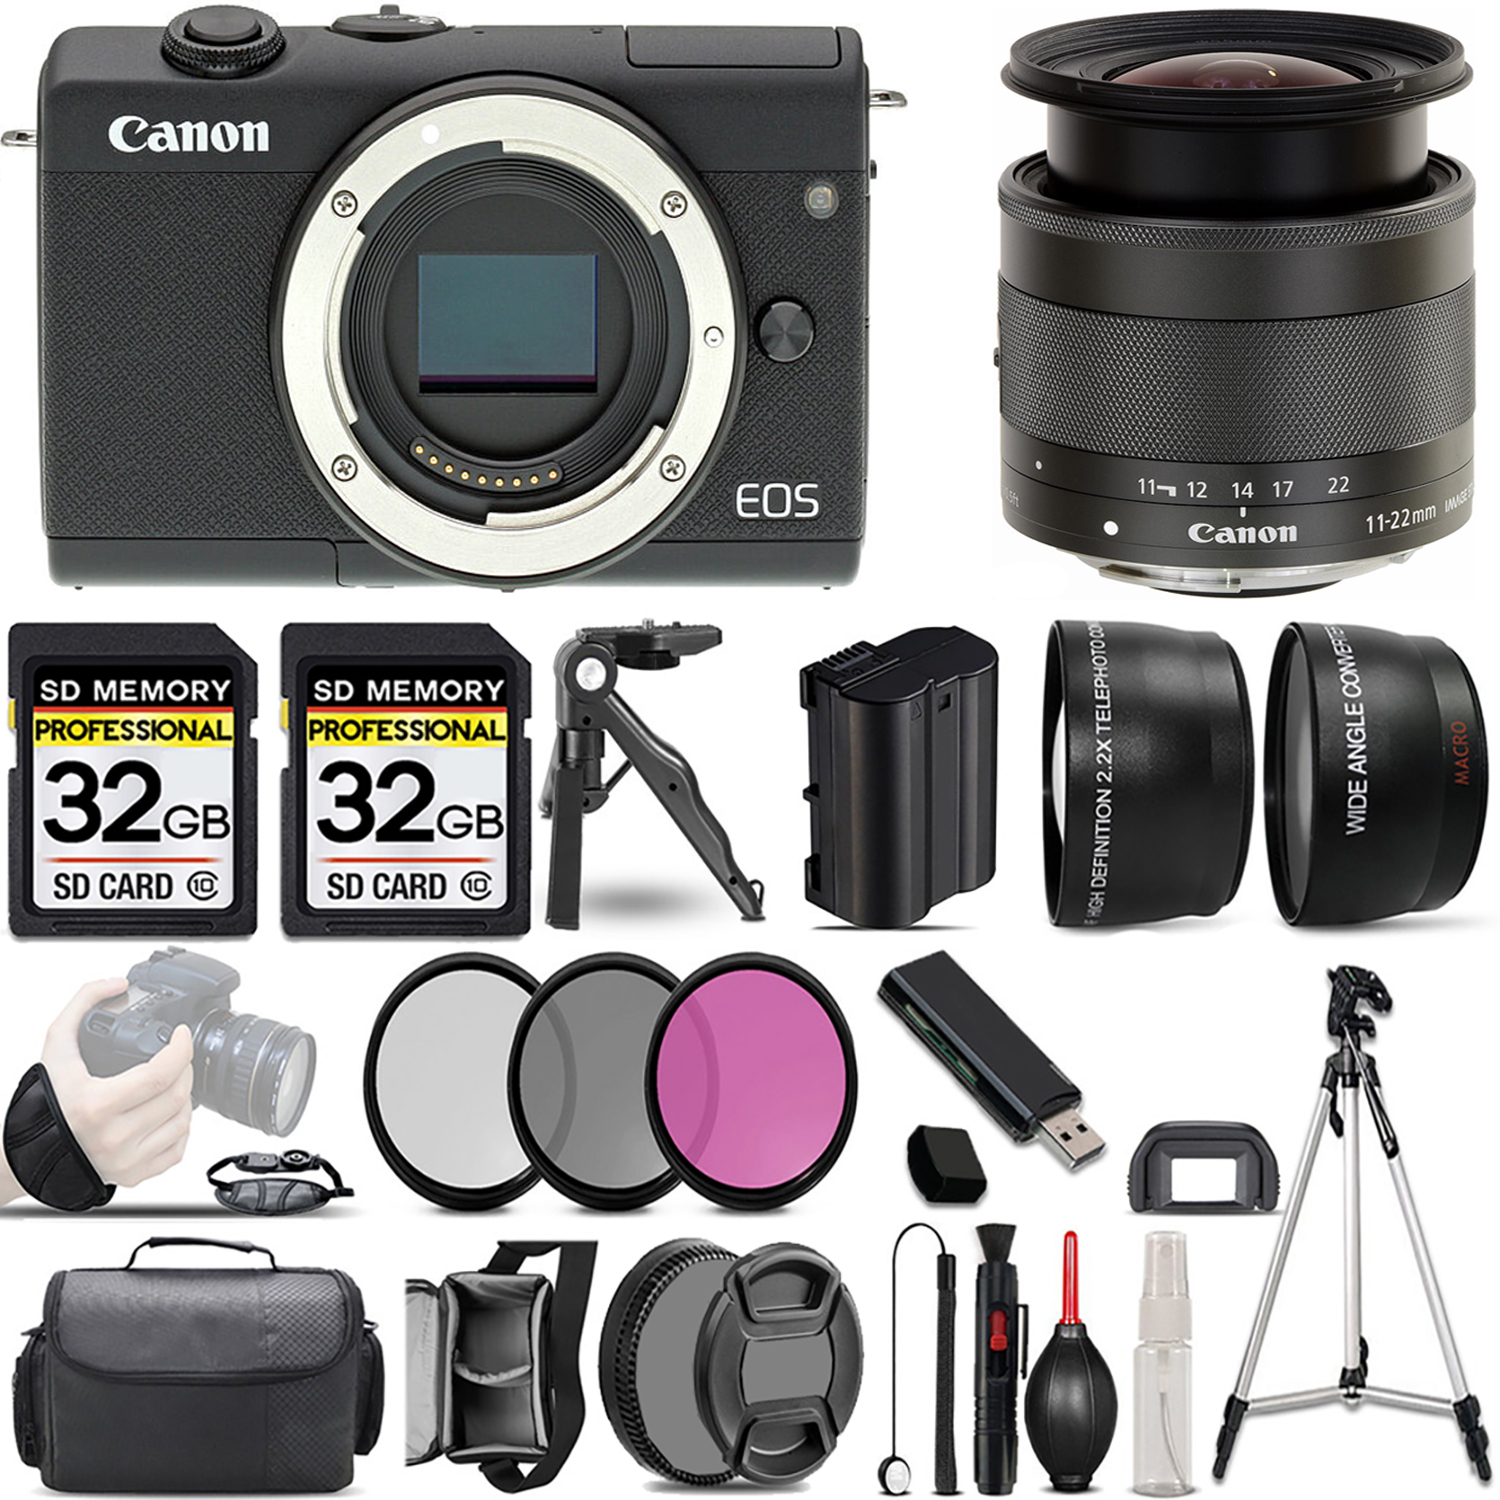 EOS M200 Camera (Black) +11-22mm f/4-5.6 IS STM Lens +3 PC Filter +64GB *FREE SHIPPING*